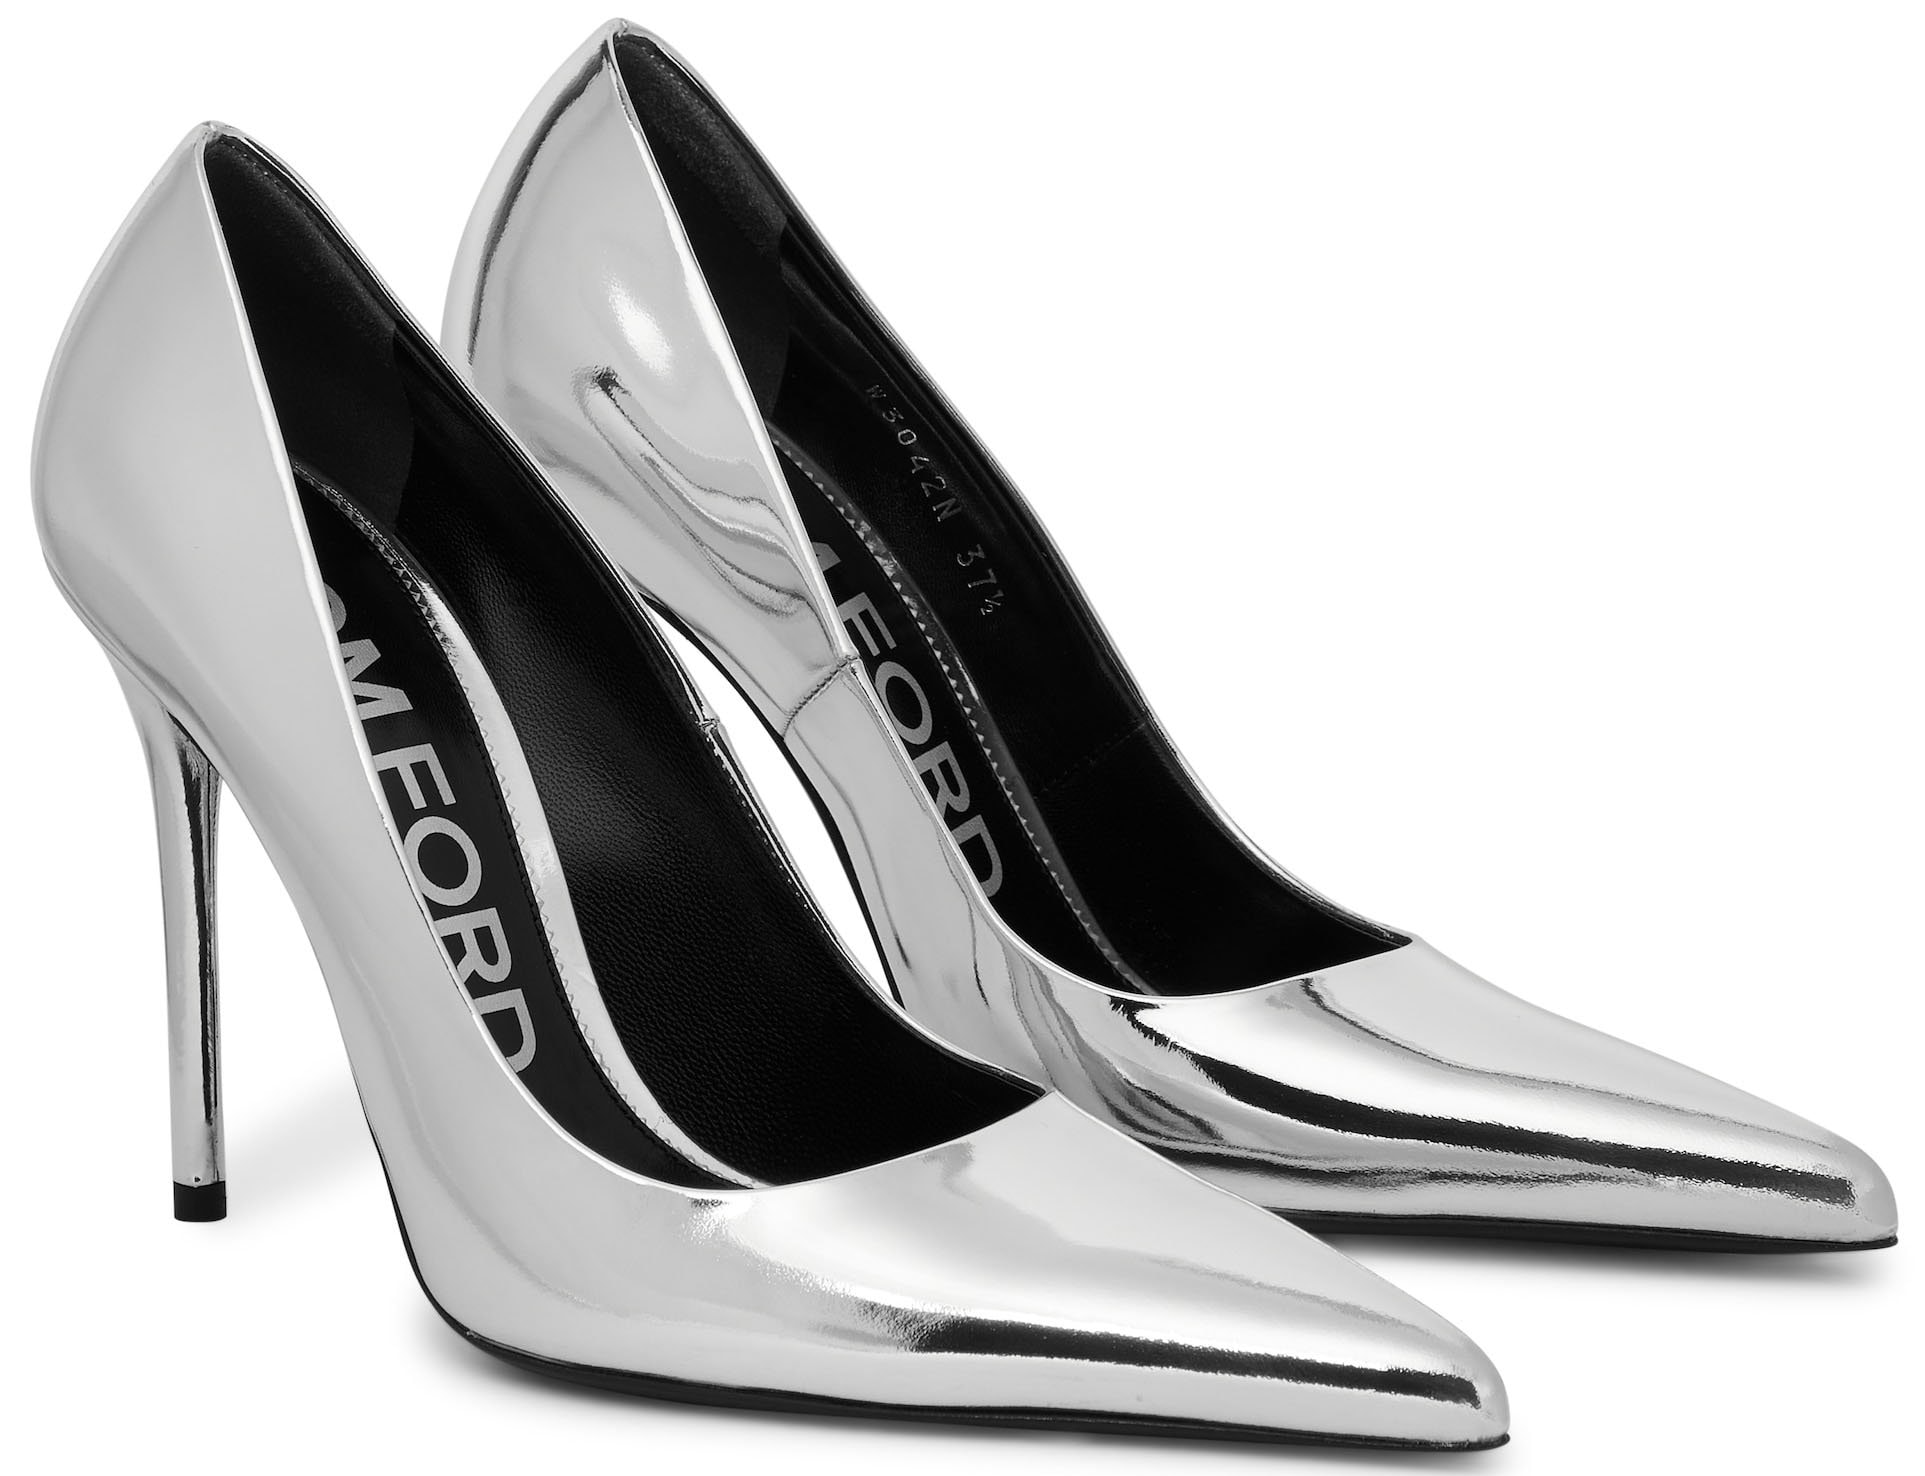 These Tom Ford pumps are made from metallic calf leather with a mirror-like finish